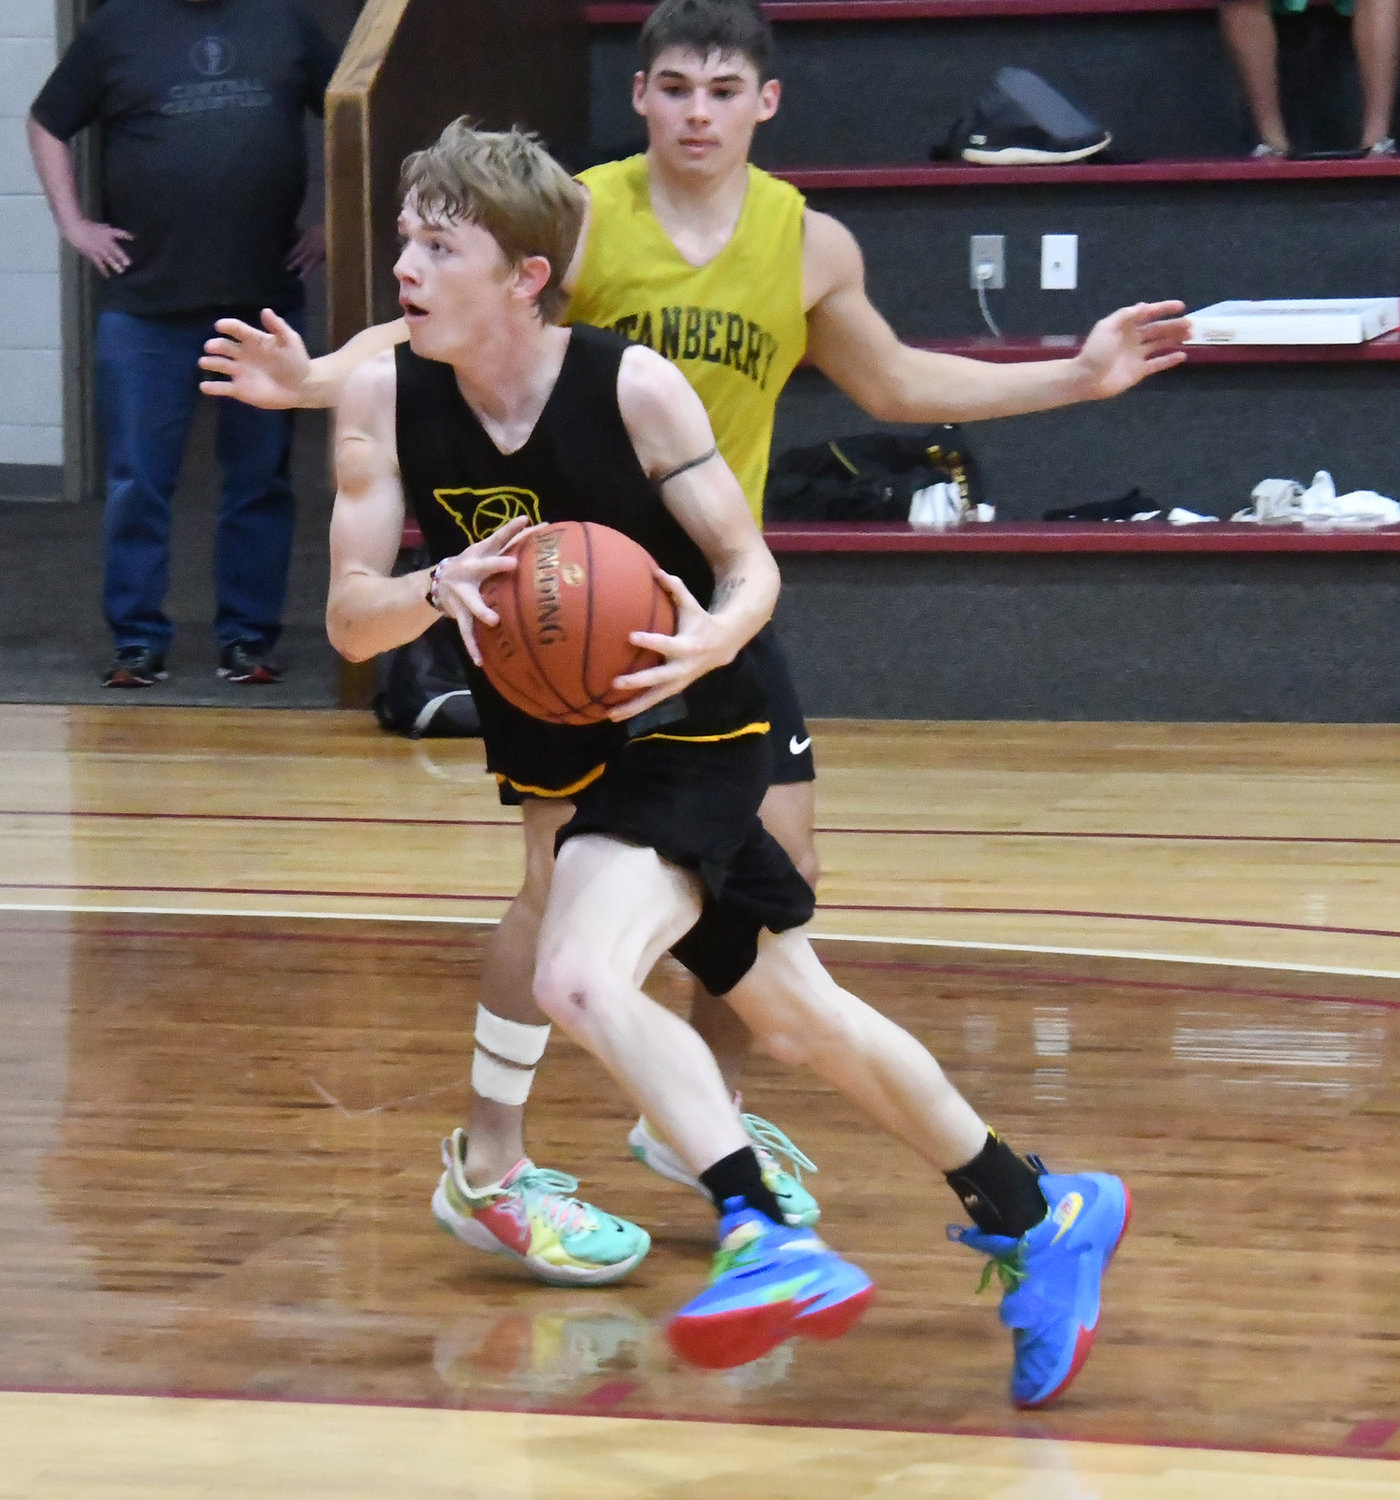 Higbee's Chad Crawford drives toward the basket during Wednesday's scrimmage versus Stanberry, who finished second in Class 1 during the 2021-22 season.